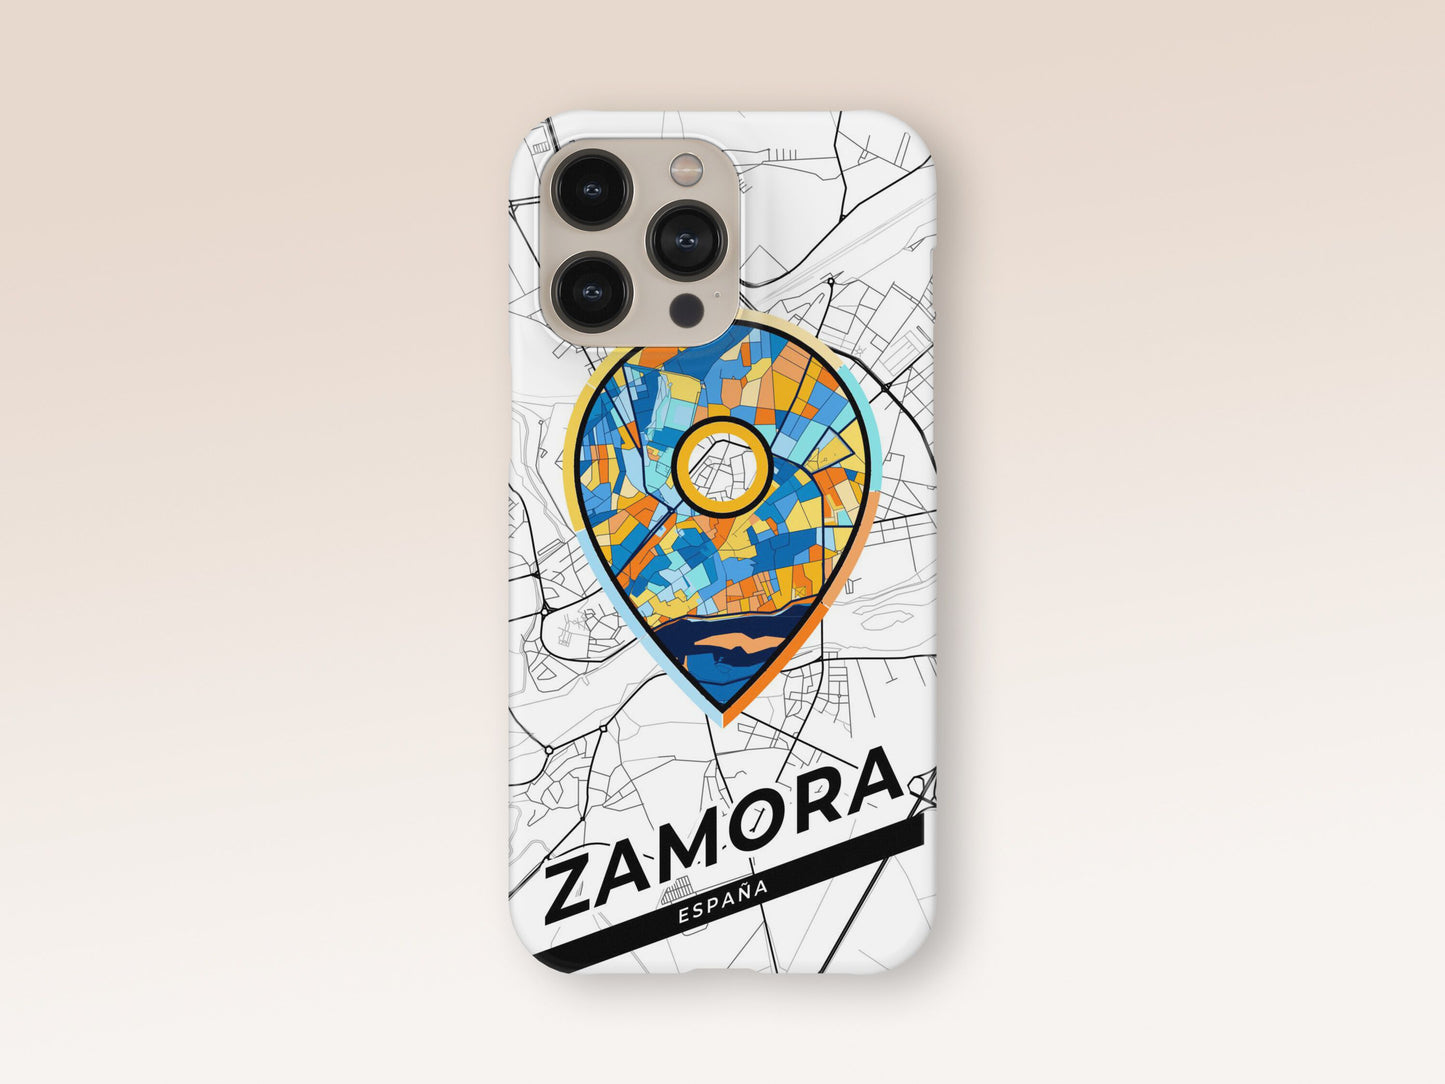 Zamora Spain slim phone case with colorful icon 1